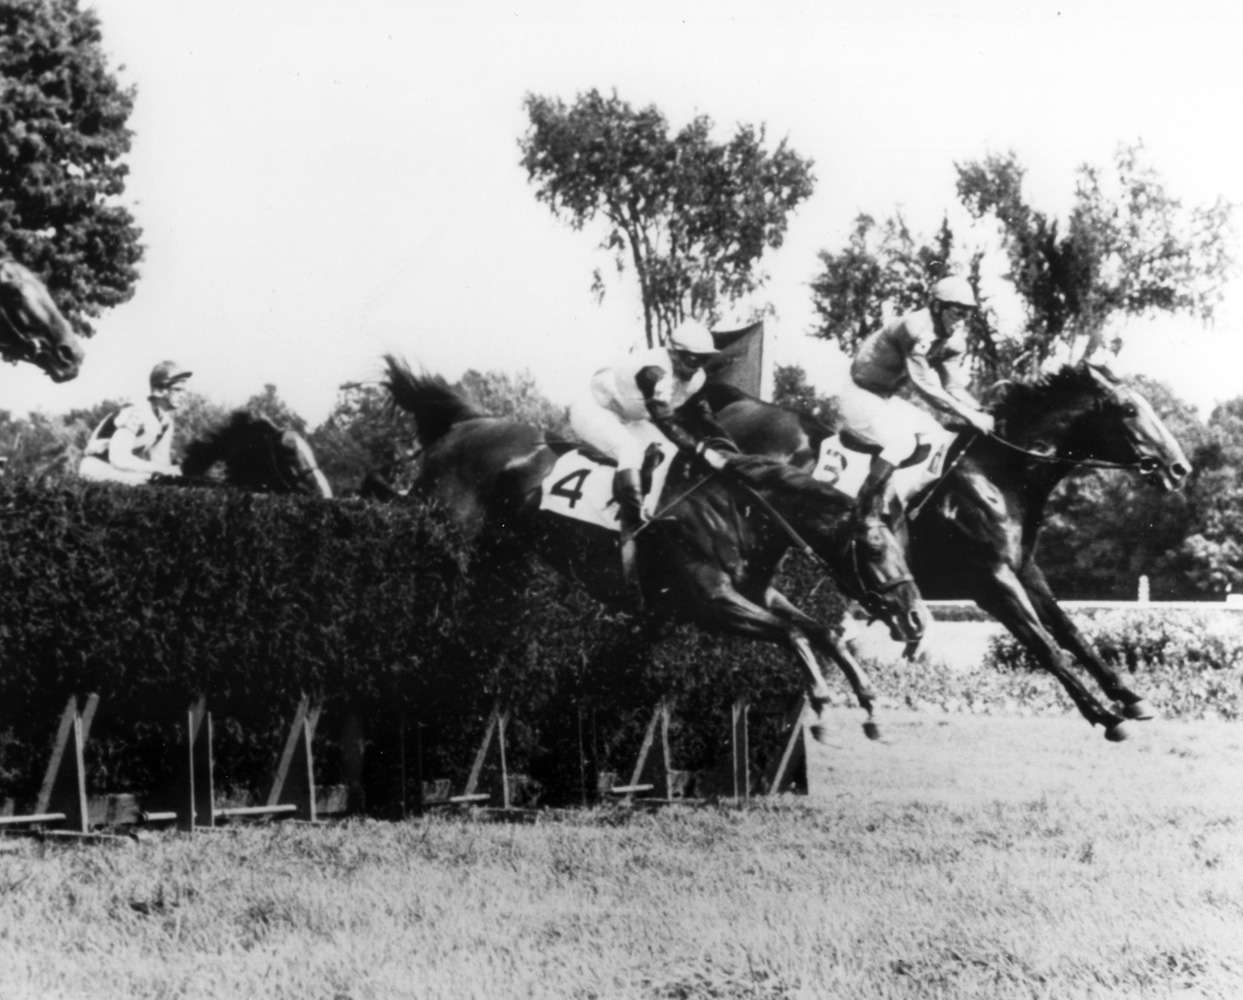 Bon Nouvel (Joe Aitcheson up) going over the first jump at the 1968 Beverwyck Steeplechase Handicap at Saratoga (The BloodHorse/Museum Collection)